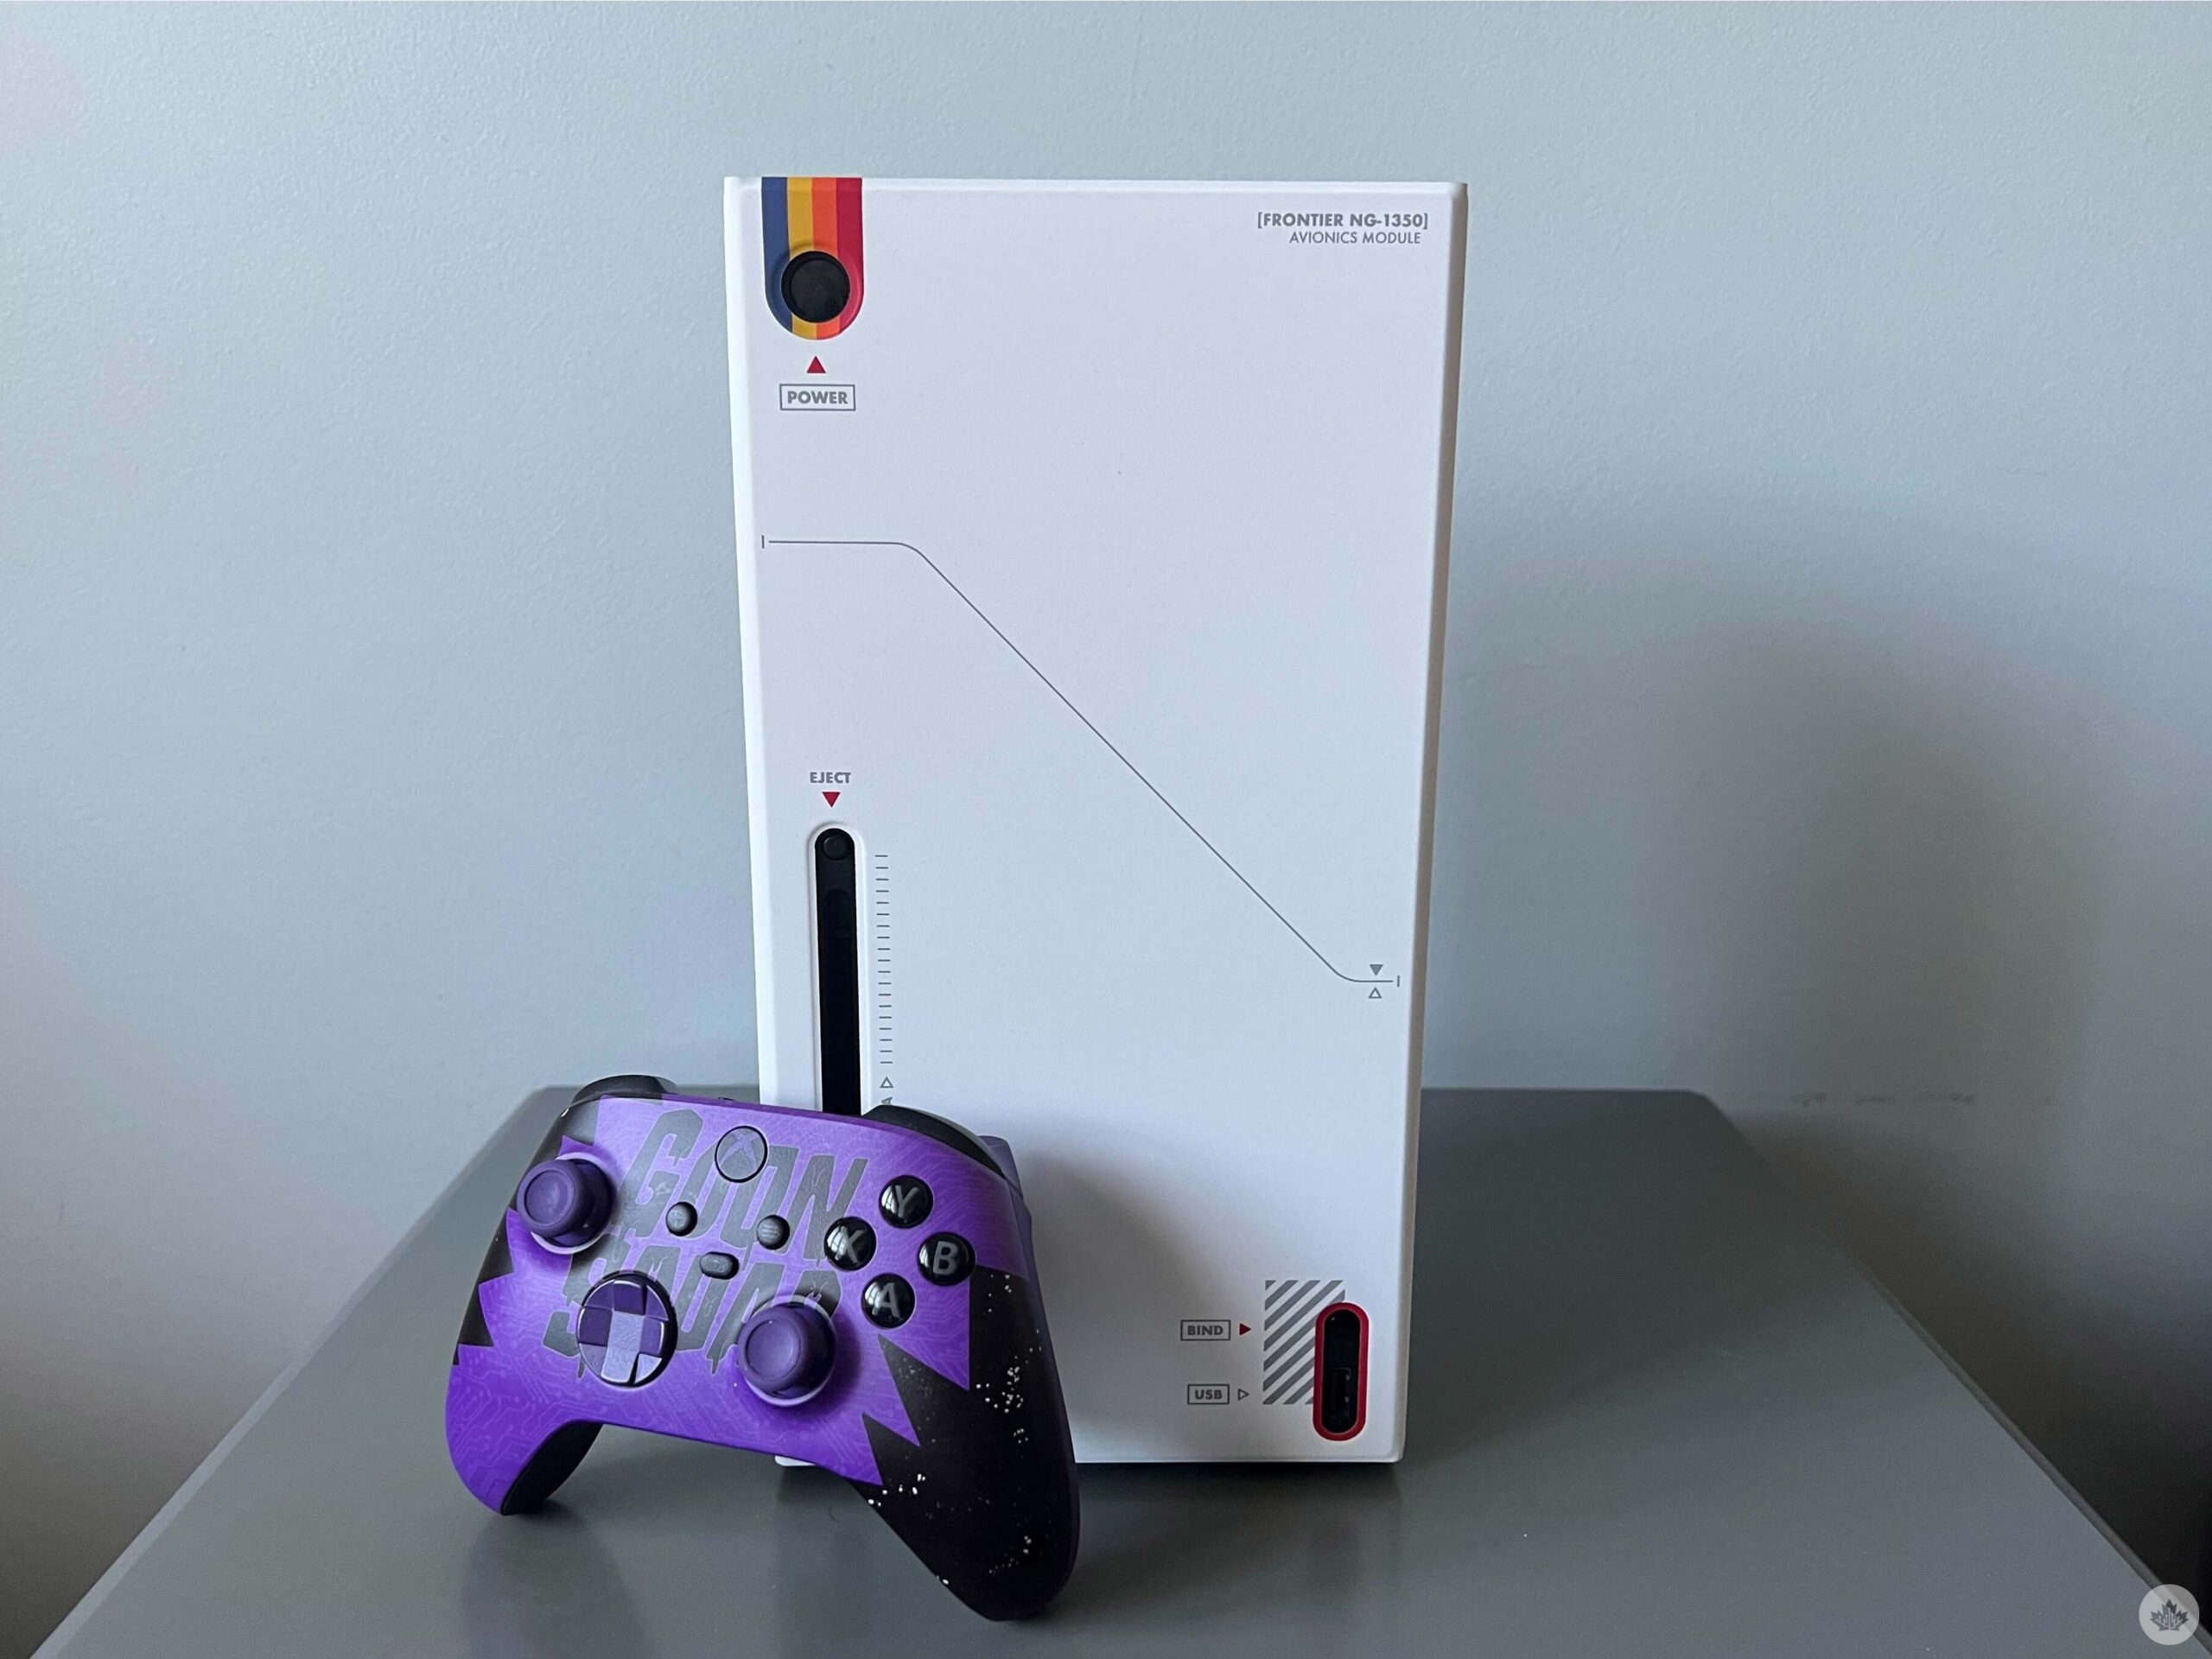 Starfield Series X console with purple Space Jam controller